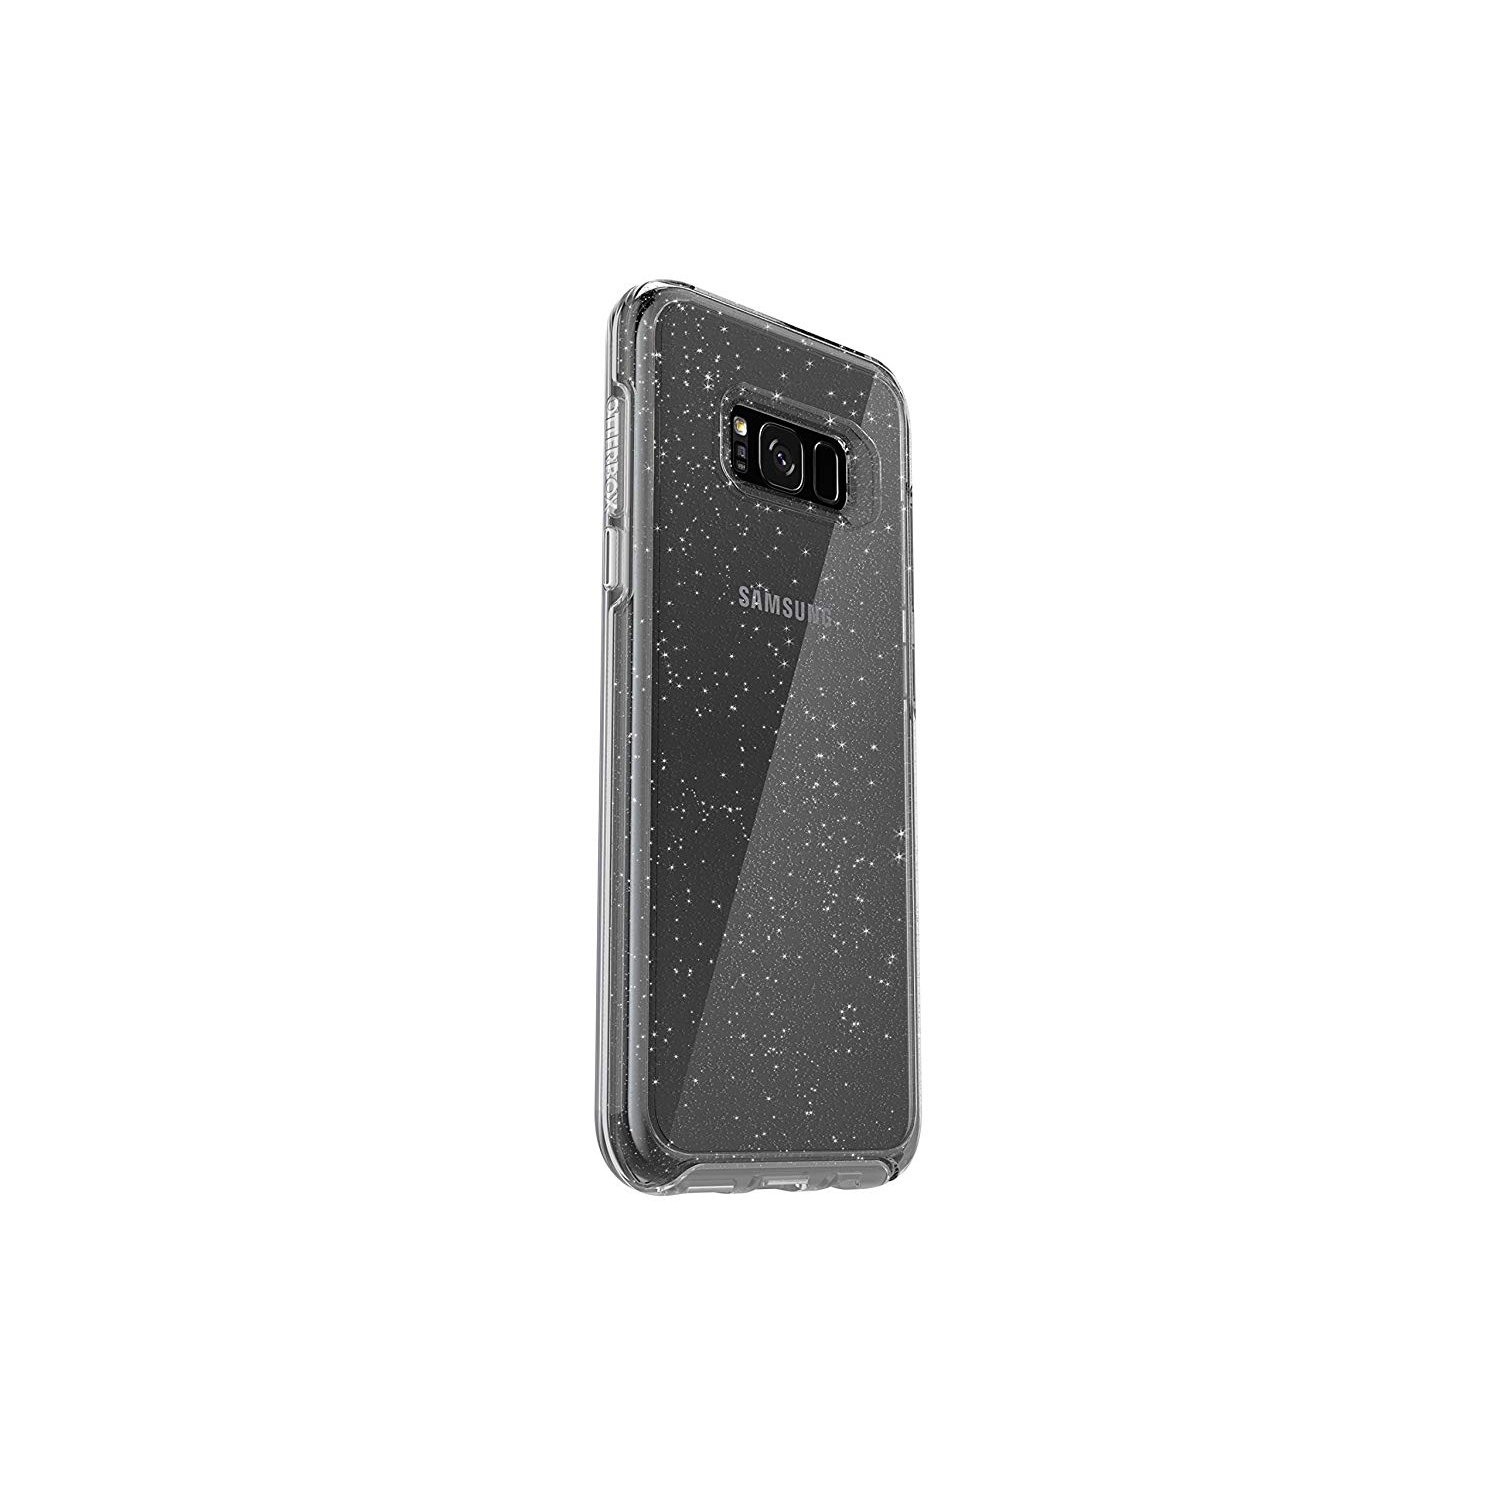 OtterBox SYMMETRY CLEAR SERIES for Samsung Galaxy S8+ - Retail Packaging - STARDUST (SILVER FLAKE CLEAR)